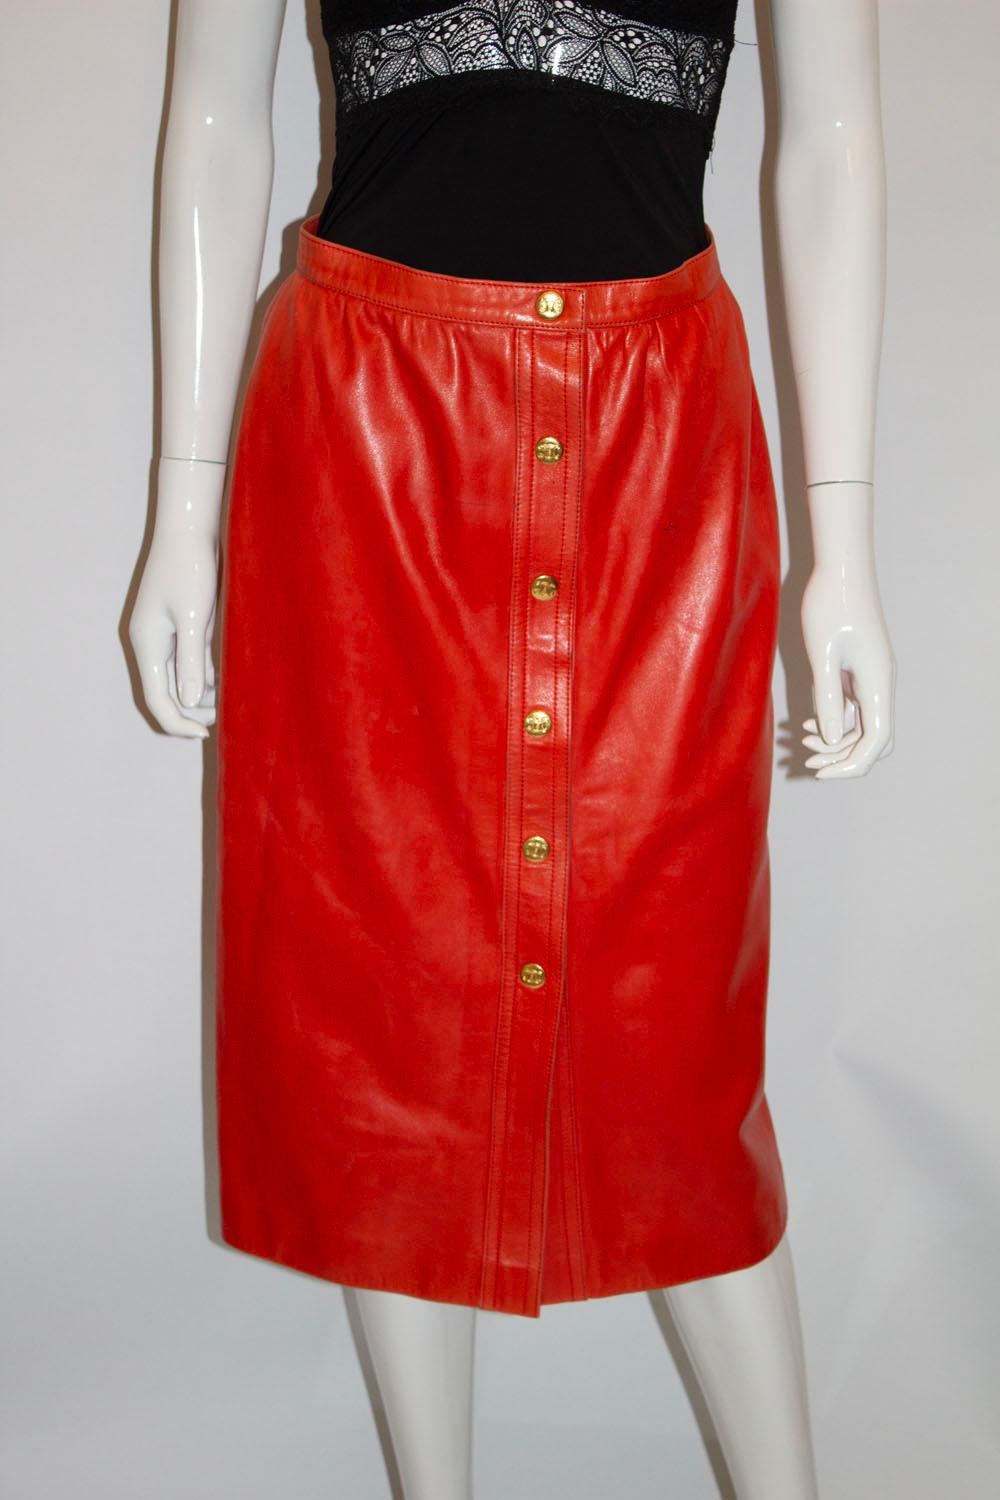 Vintage Celine Leather Skirt In Good Condition For Sale In London, GB